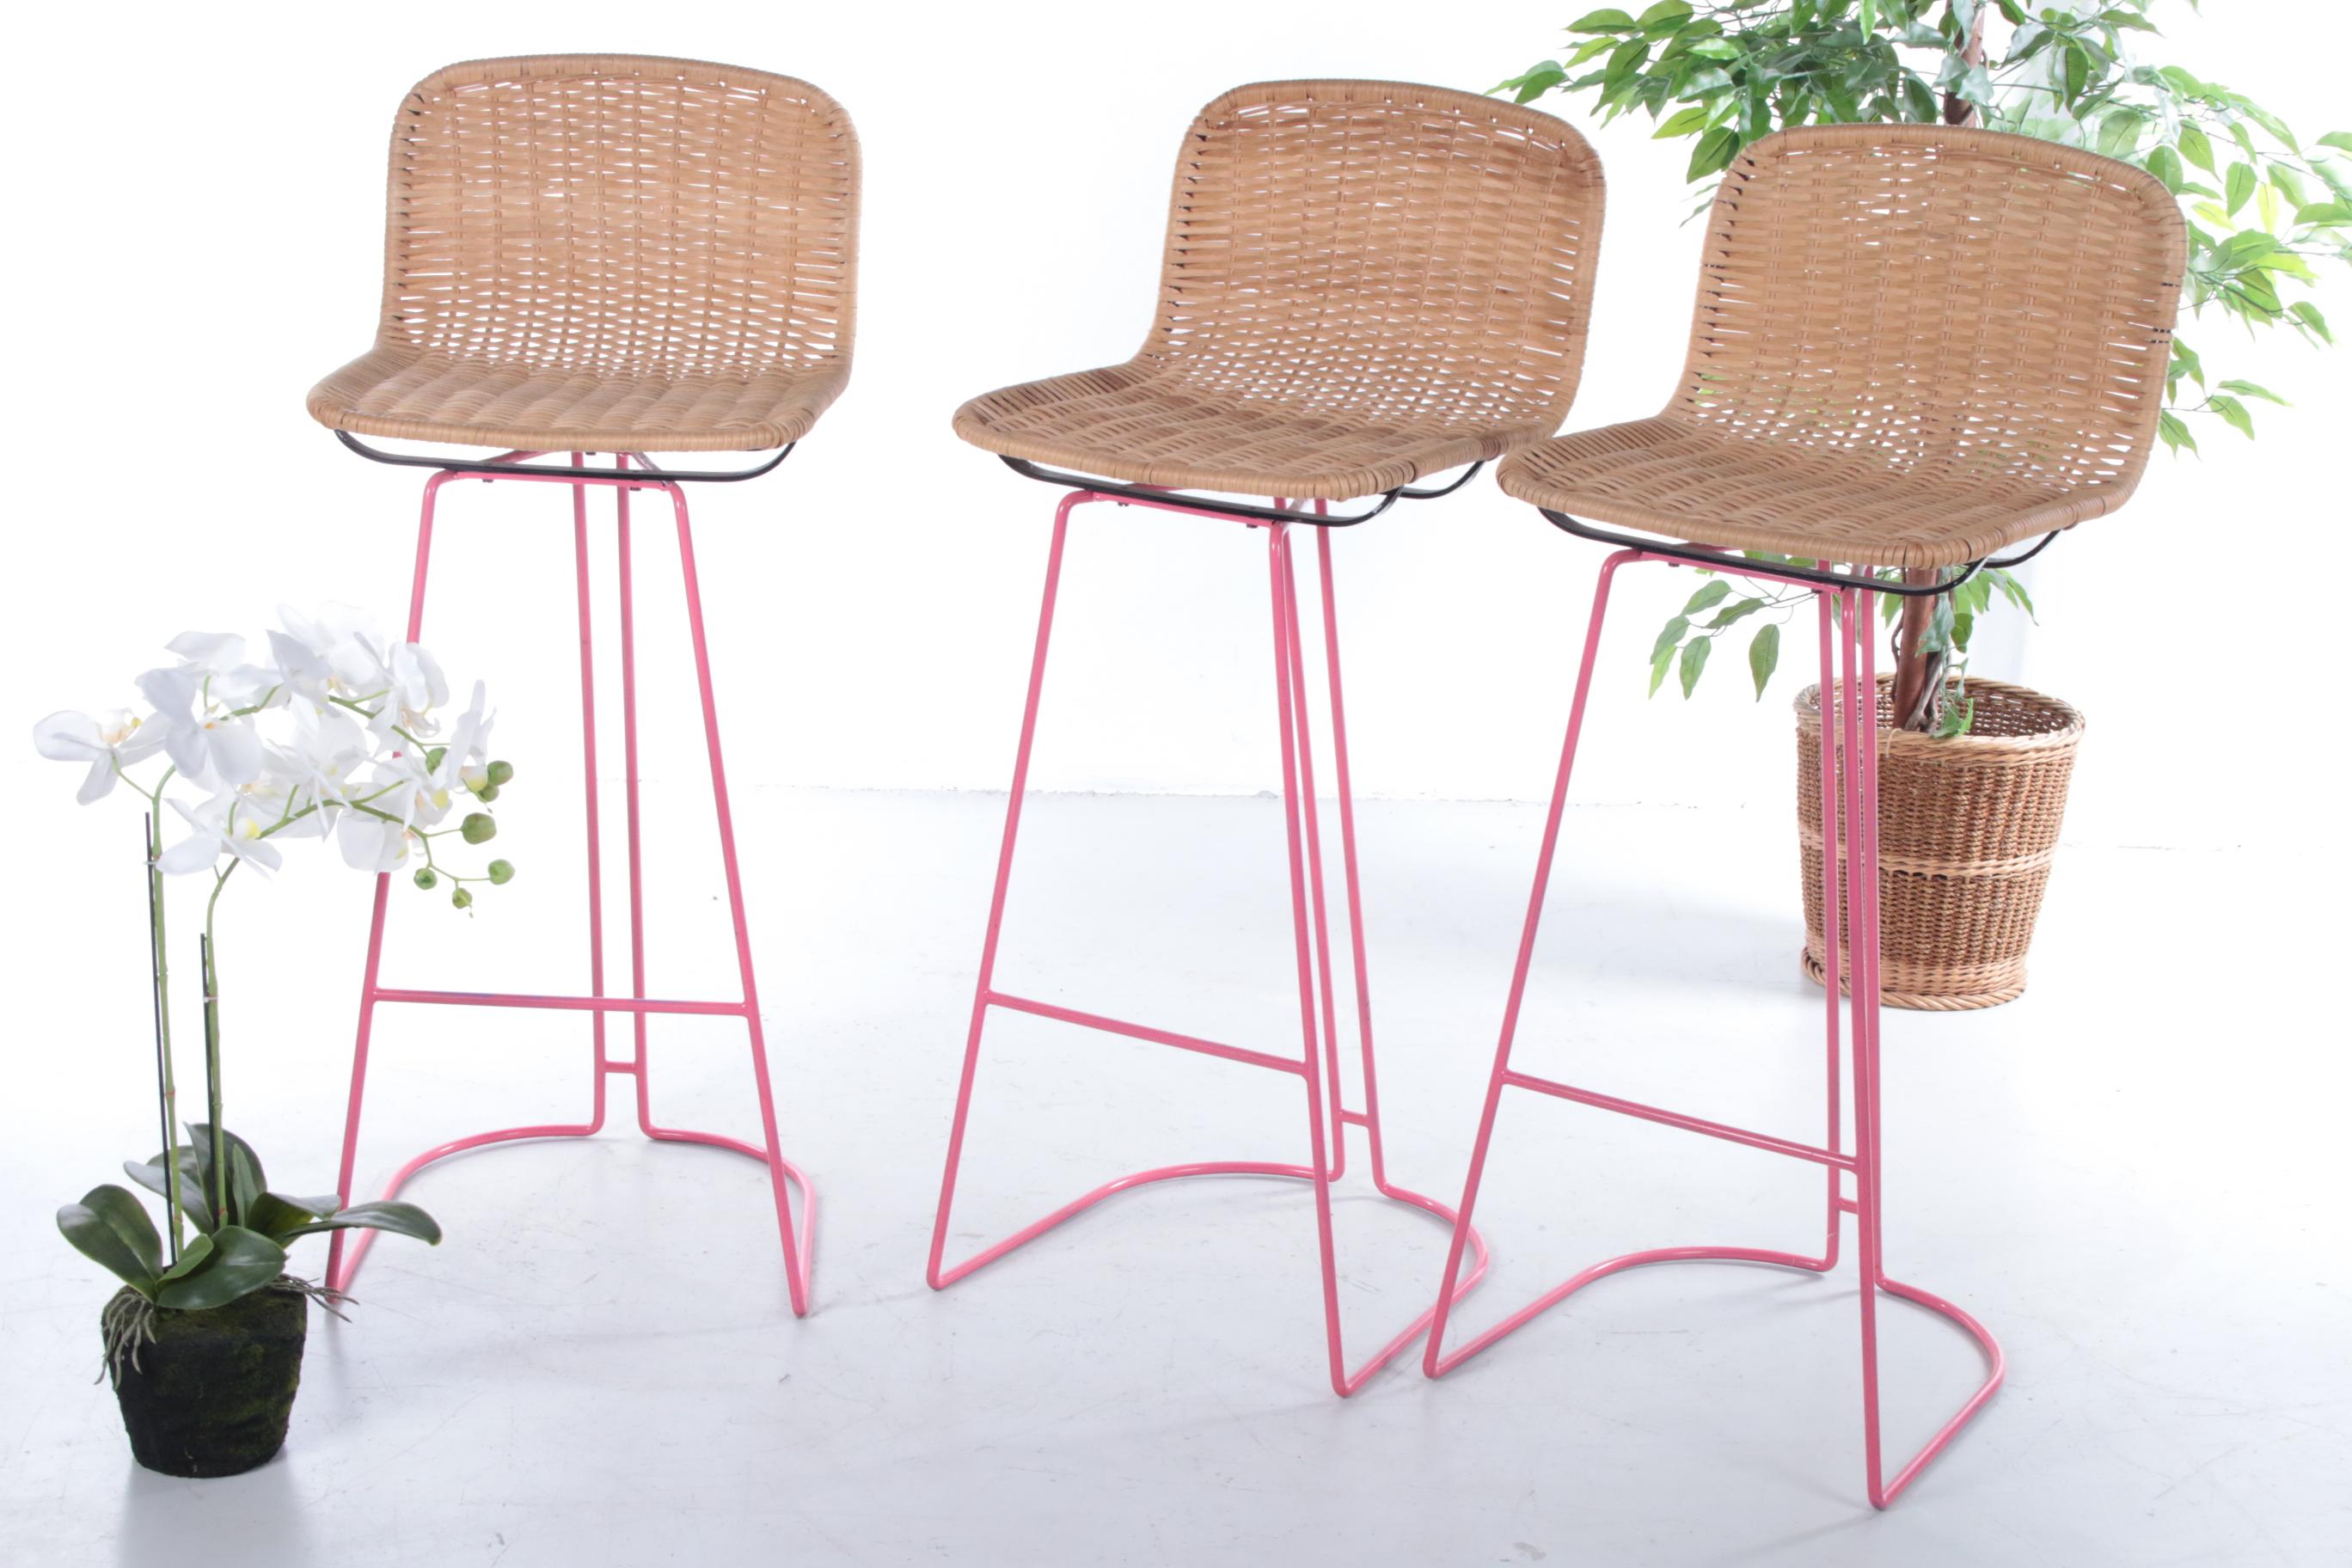 Italian set of 3 bar stools with cane and metal by Cidue, 1980s

Set of three barstools with a pink lacquered metal base and cane seat. The light pink color gives a special and unique touch to the stools.

Made in the 80's by Cidue, Italy. All